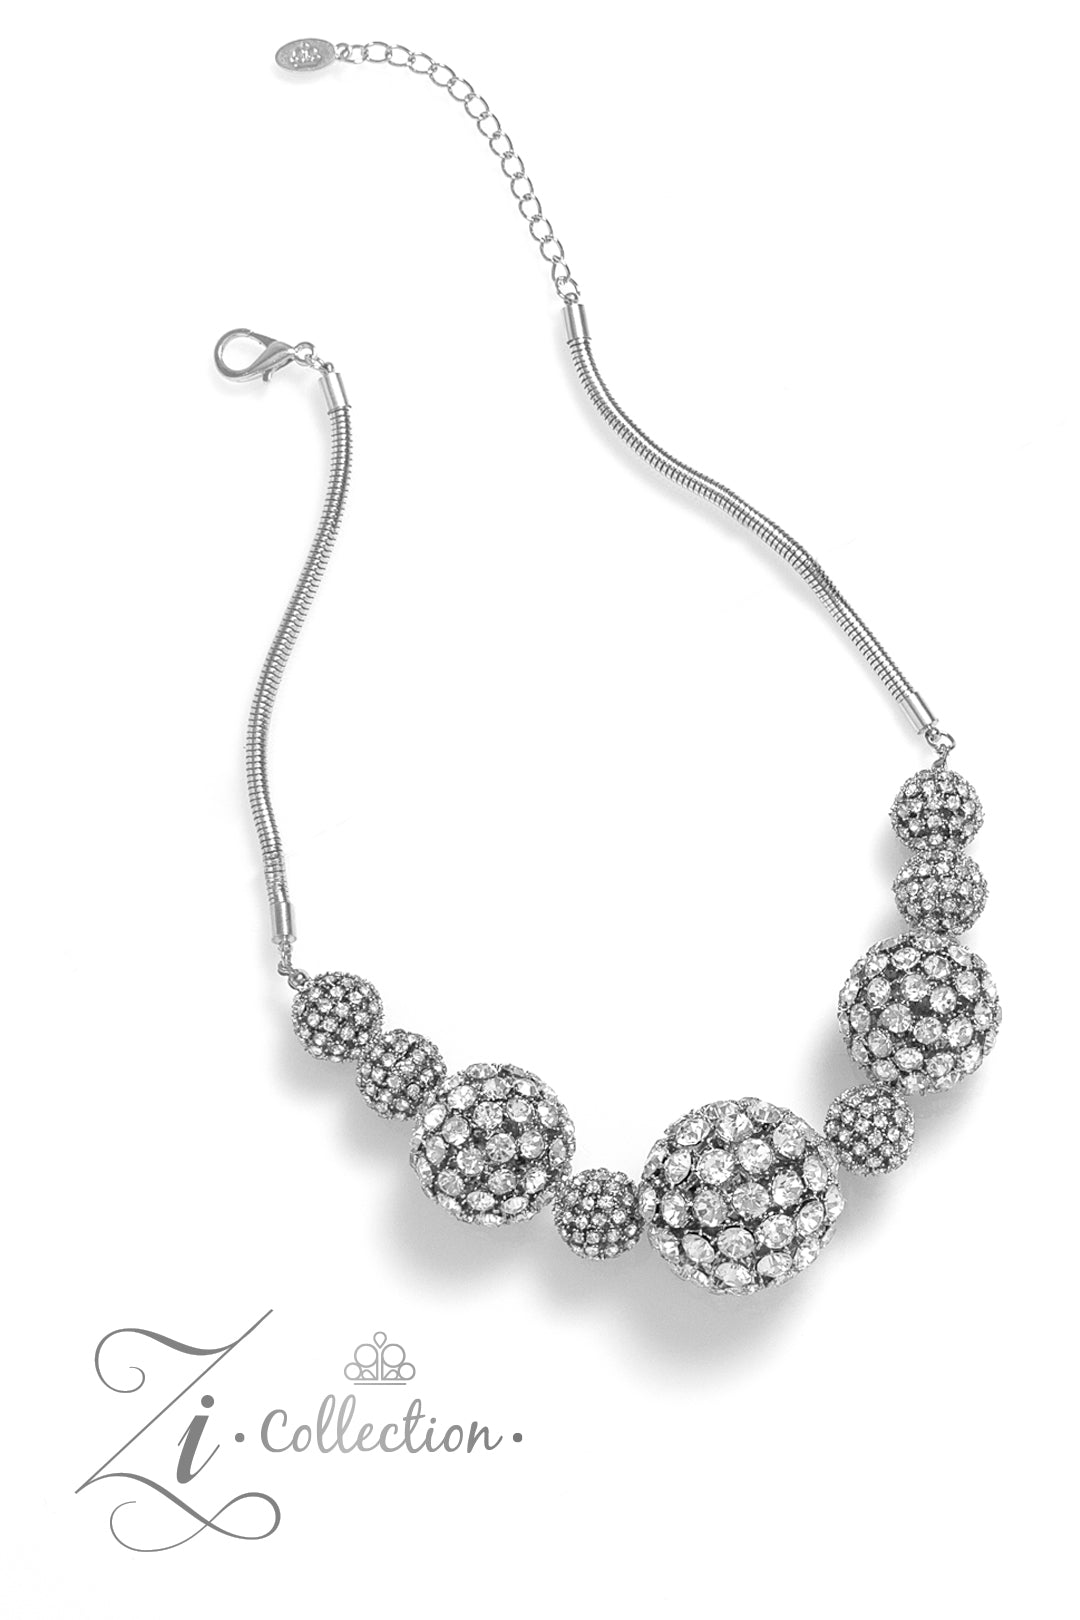 Glittery, white rhinestones cluster together, creating dramatically oversized, airy, spheres that sparkle vivaciously. Smaller rhinestone-encrusted spheres dance between the exaggerated accents, resulting in a dynamic display of texture and sheen. Features an adjustable clasp closure.  Sold as one individual necklace. Includes one pair of matching earrings.